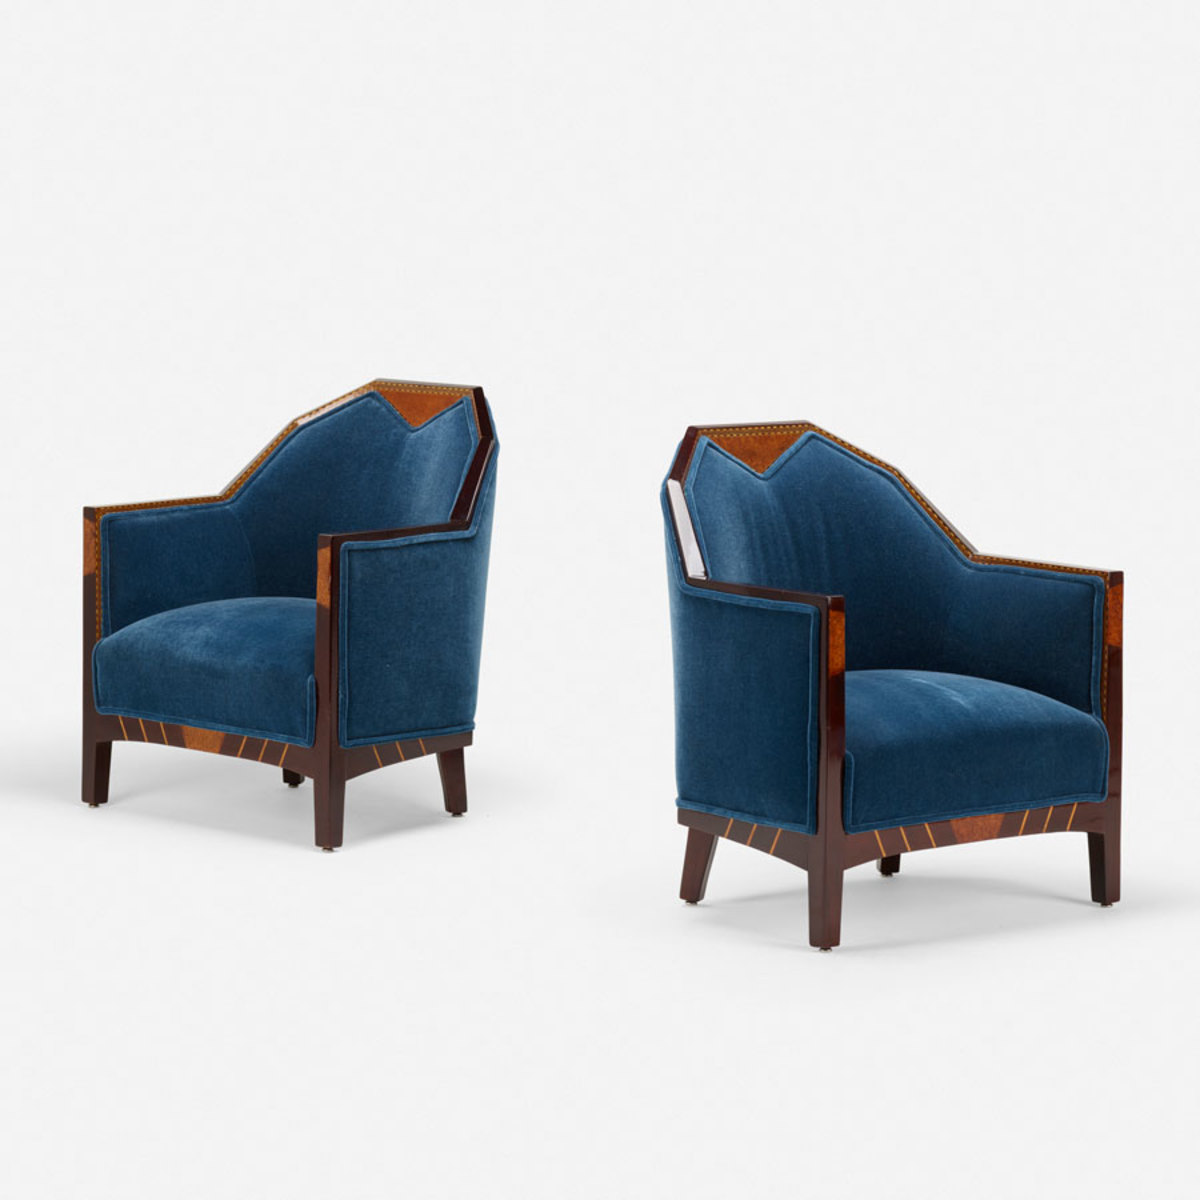 Art Deco is the No. 1 trend in the 20 to 40 age group. Pair of Art Deco club chairs, c. 1930, stained mahogany, mixed wood inlay, mohair; $4,375.